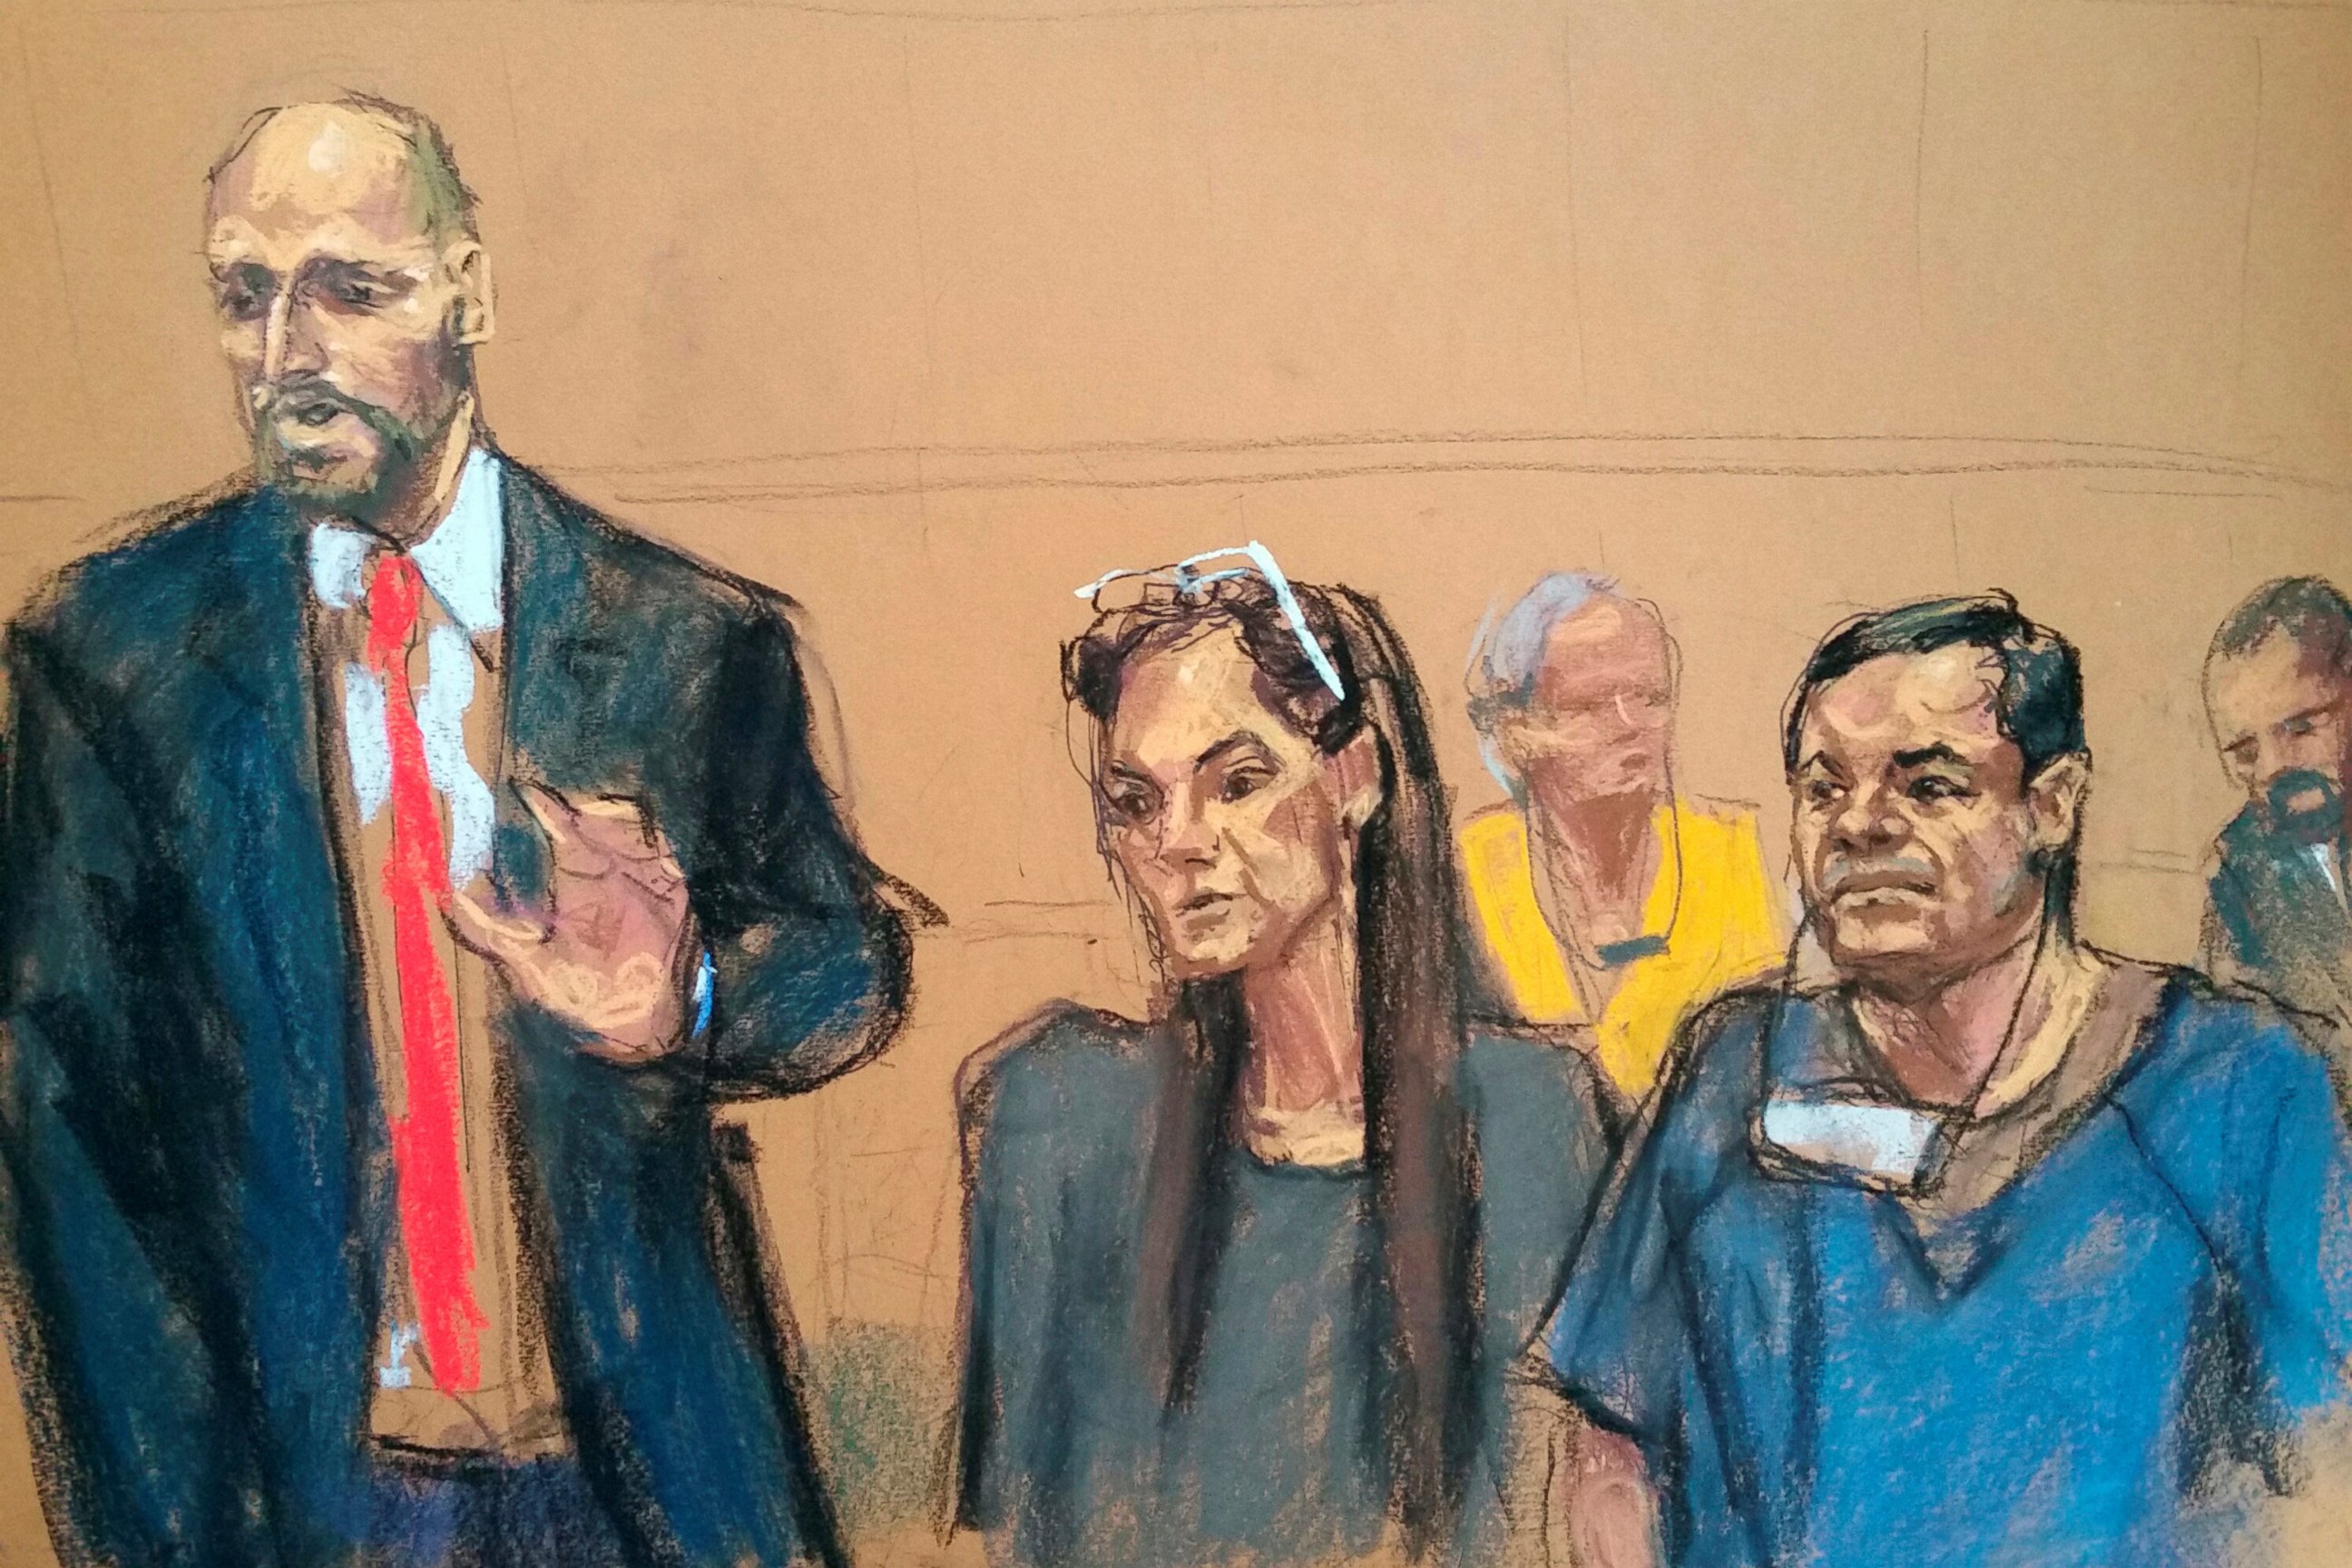 PHOTO: Joaquin "El Chapo" Guzman, right, and his attorneys Michael Schneider, left, and Michelle Gelernt are shown in a sketch of a court appearance at the Brooklyn Federal Courthouse in Brooklyn, New York, May 5, 2017. 